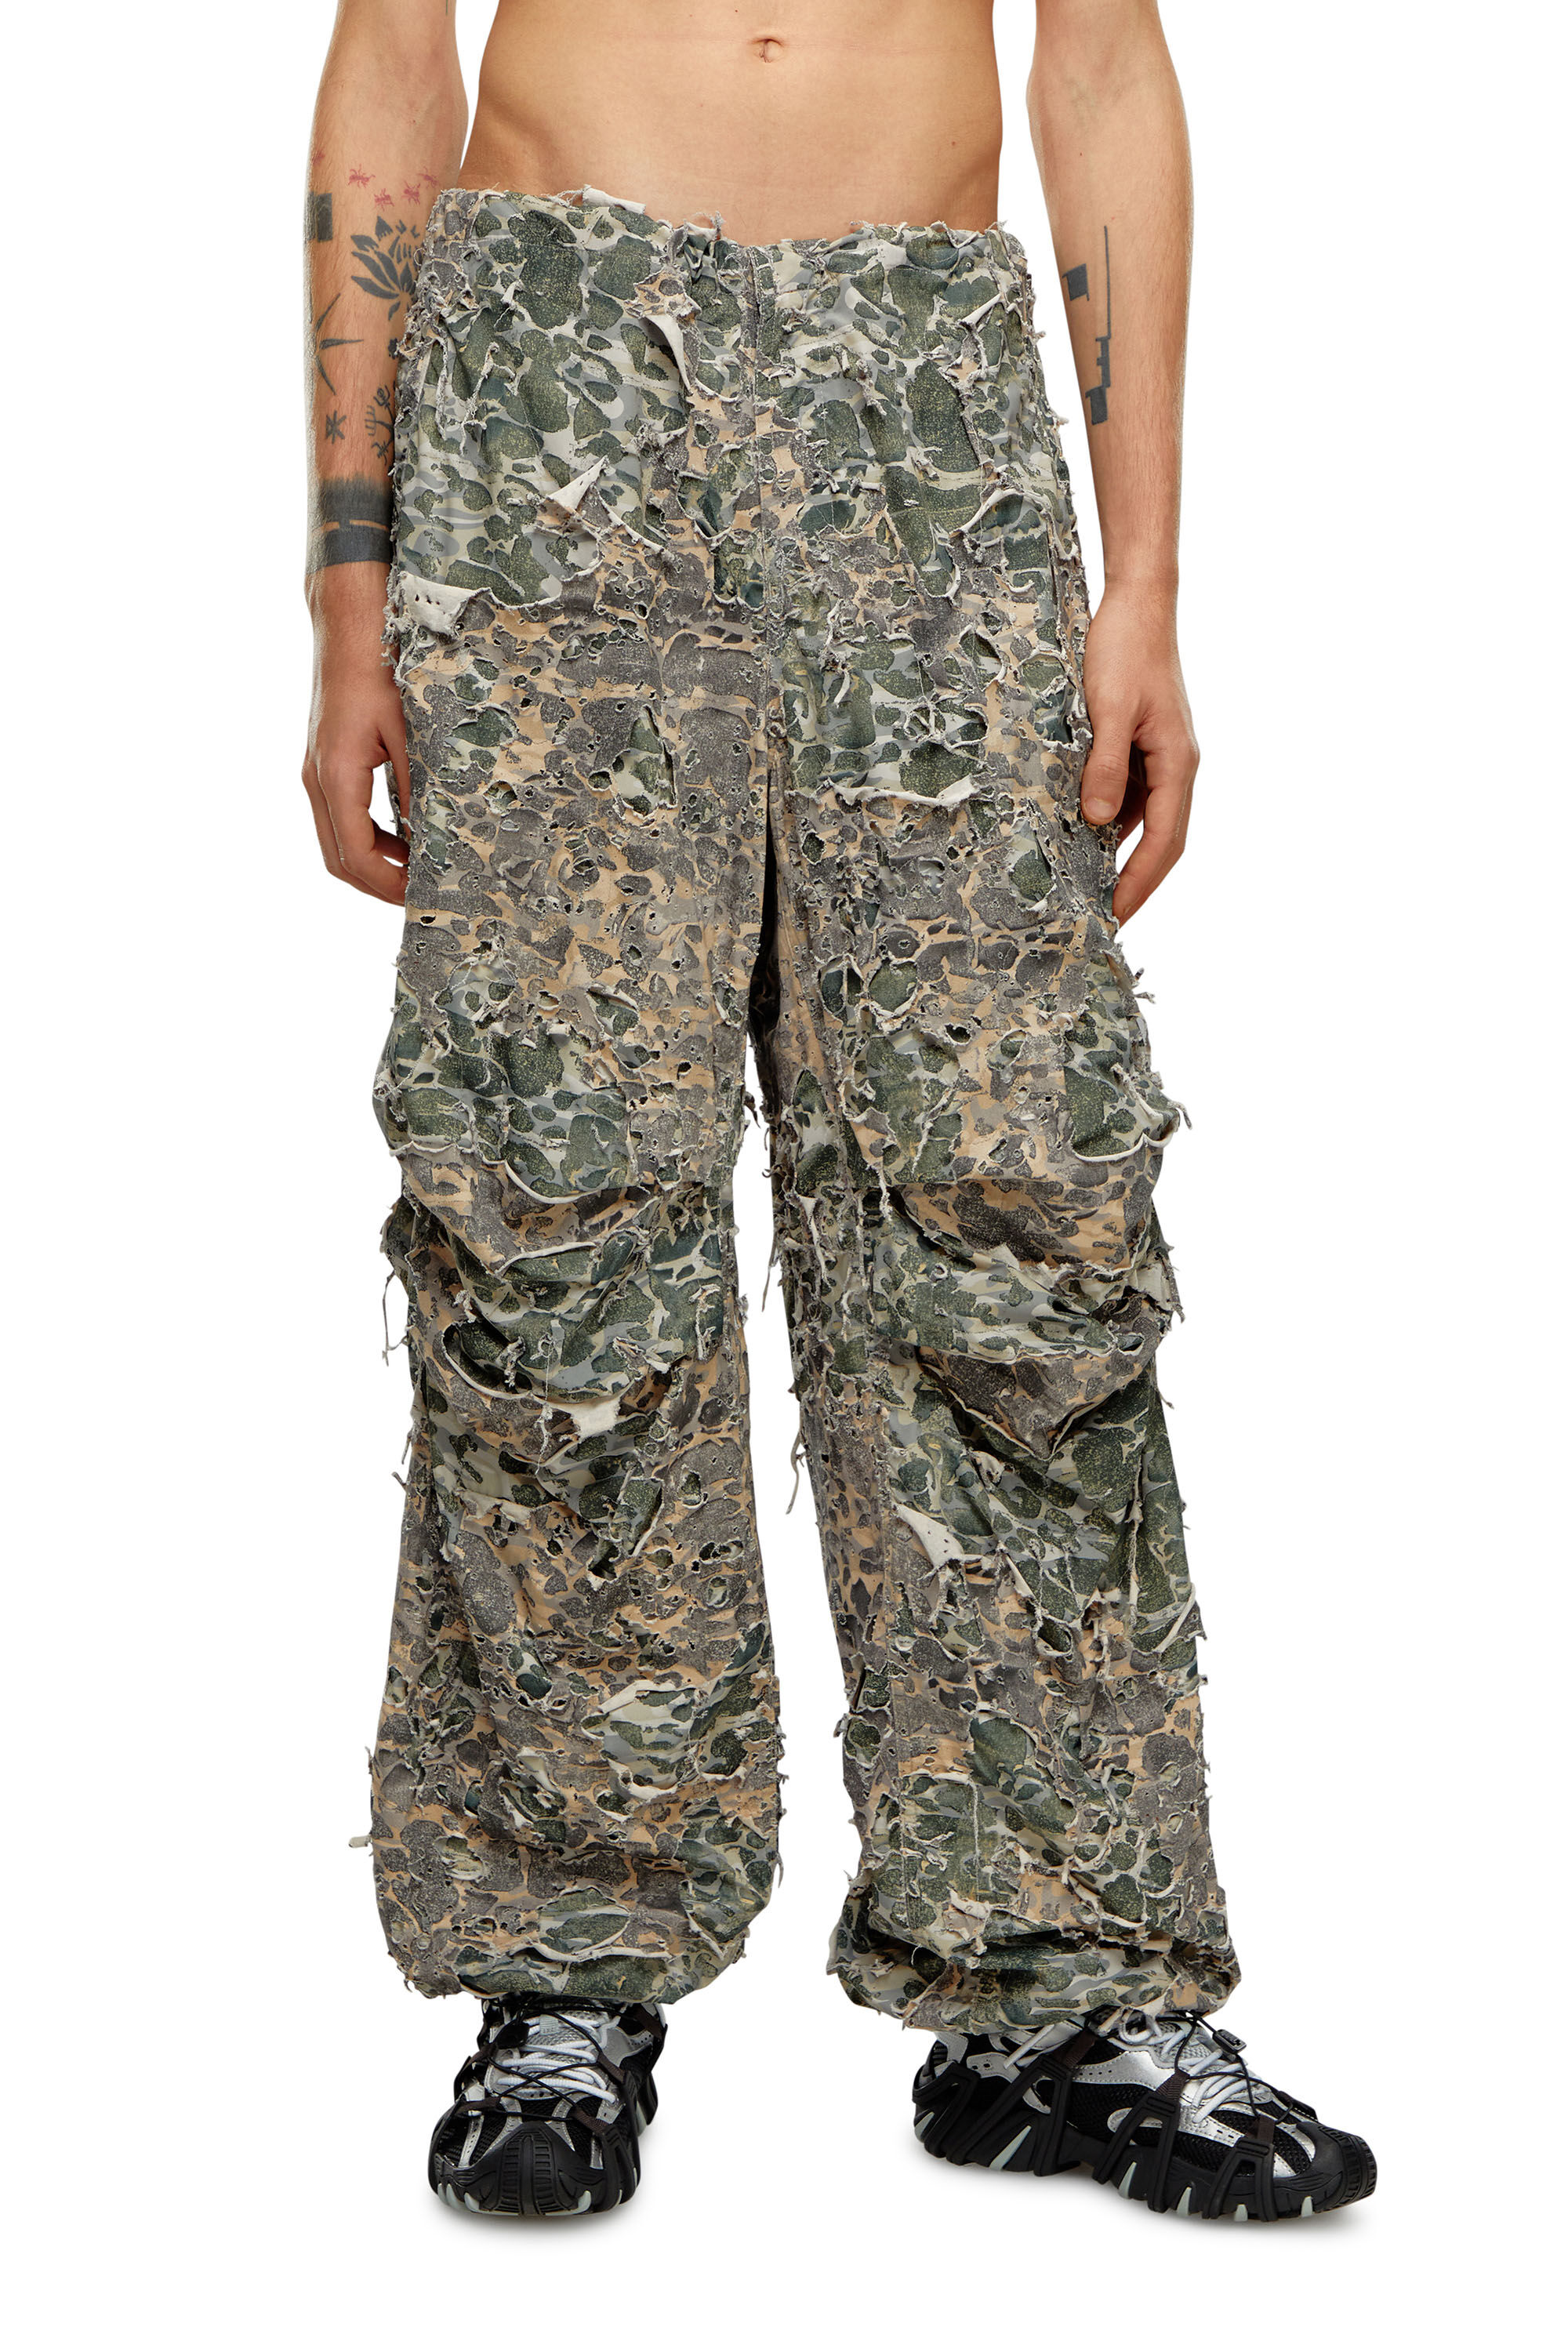 Men's Camo pants with destroyed finish | Multicolor | Diesel